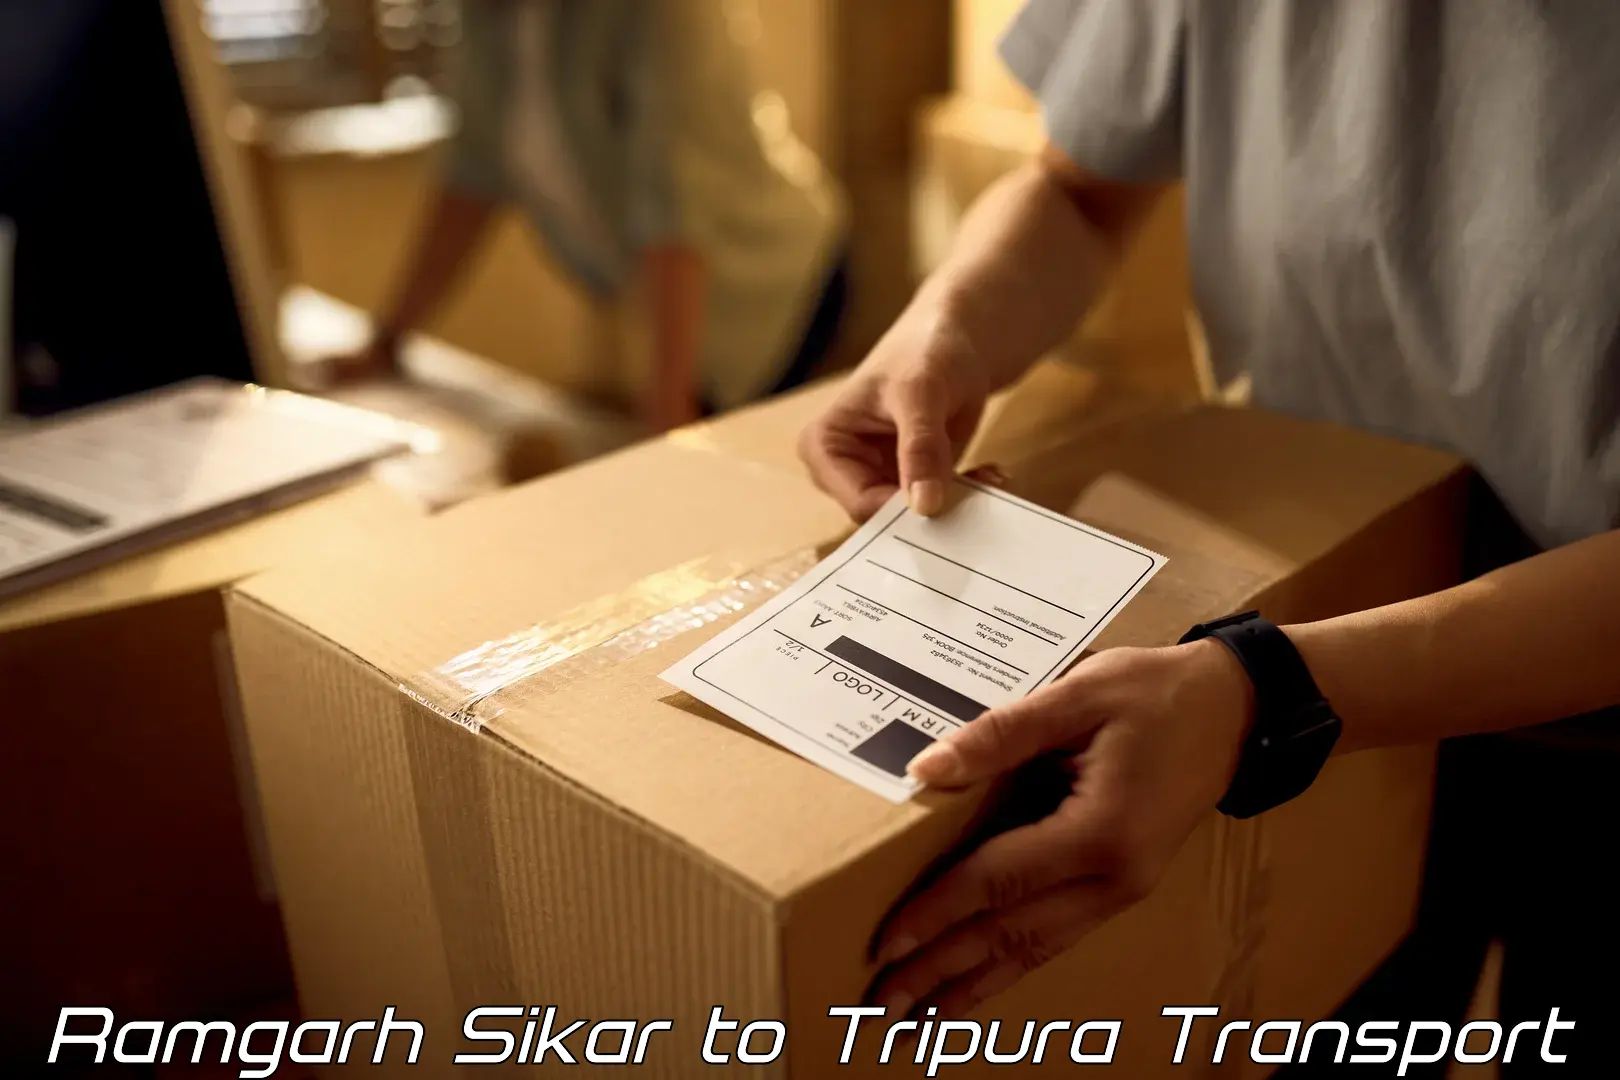 Container transport service Ramgarh Sikar to West Tripura